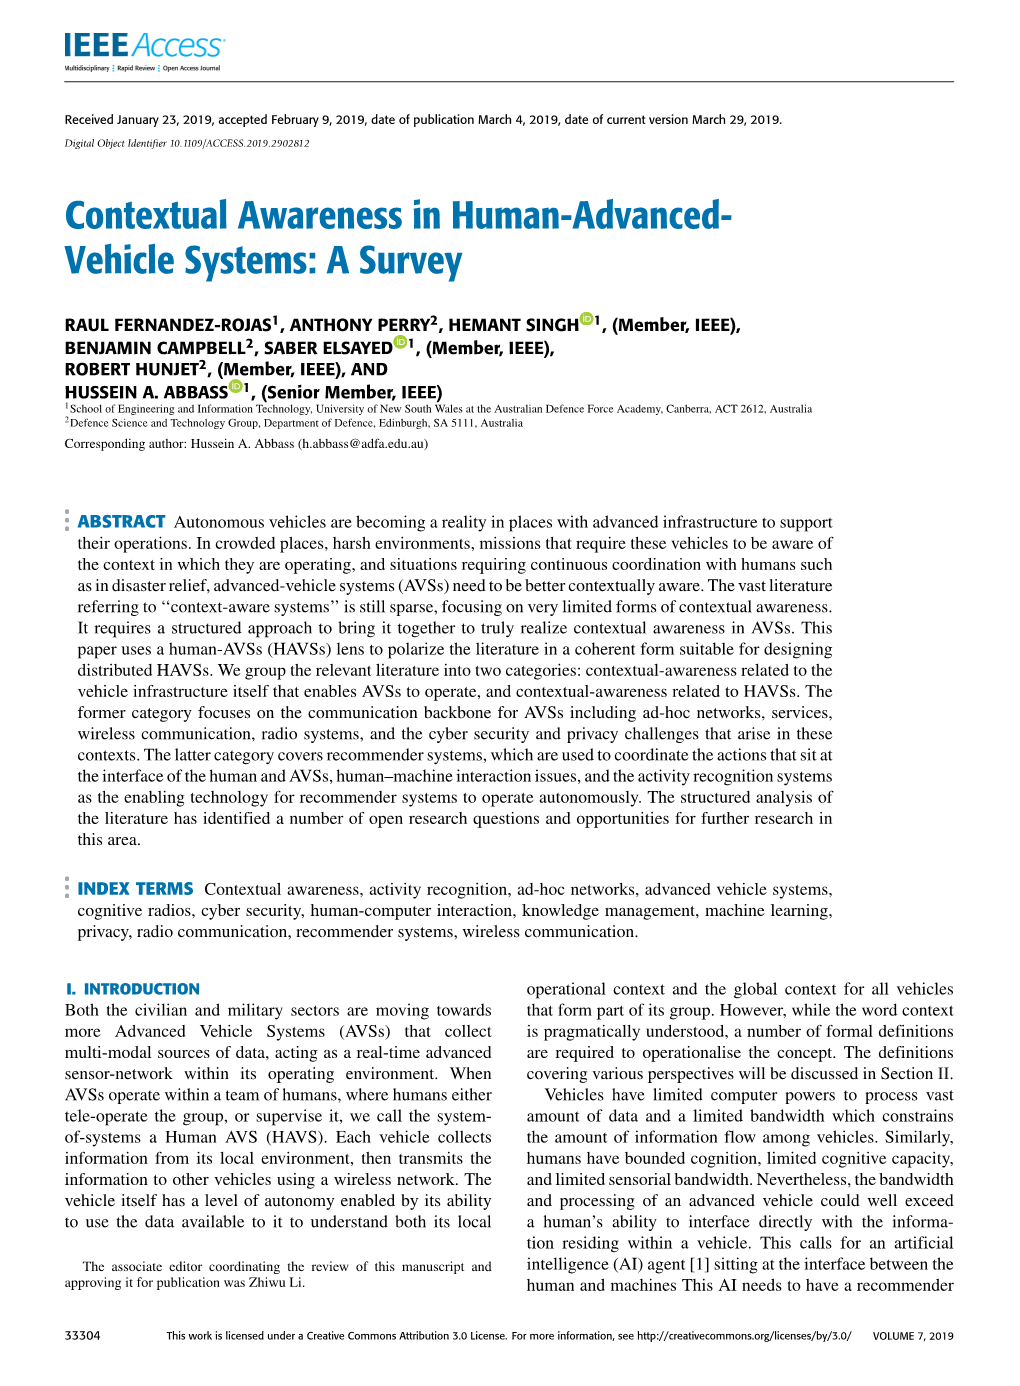 Contextual Awareness in Human-Advanced-Vehicle Systems